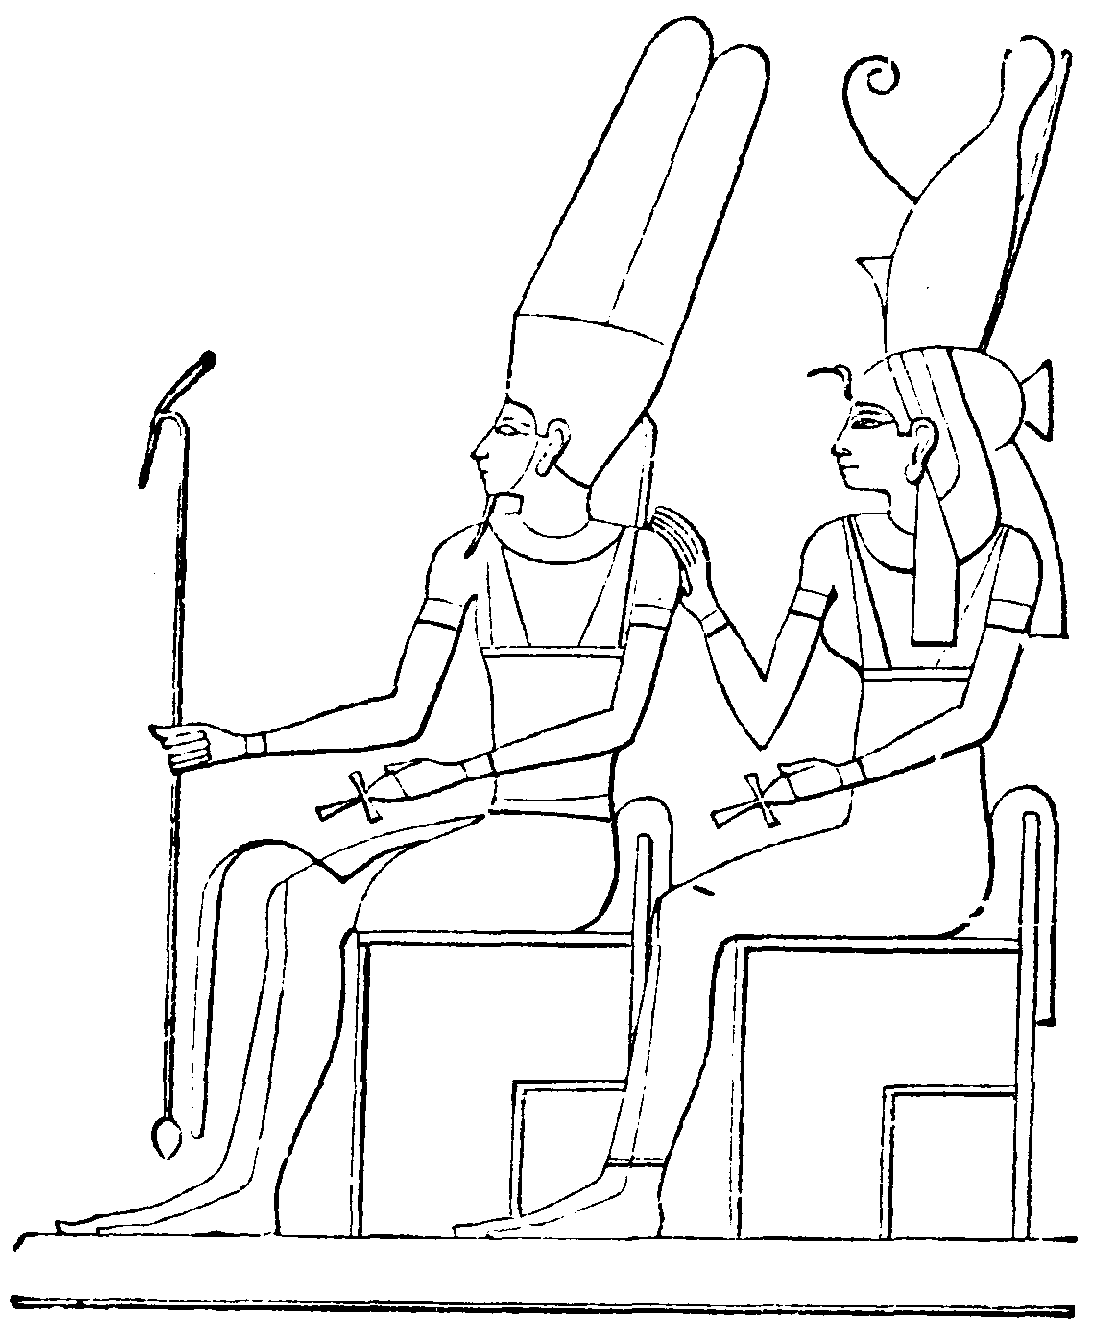 Unicorn coloring pages - Free 25+ Ancient Egypt Coloring Pages Printable